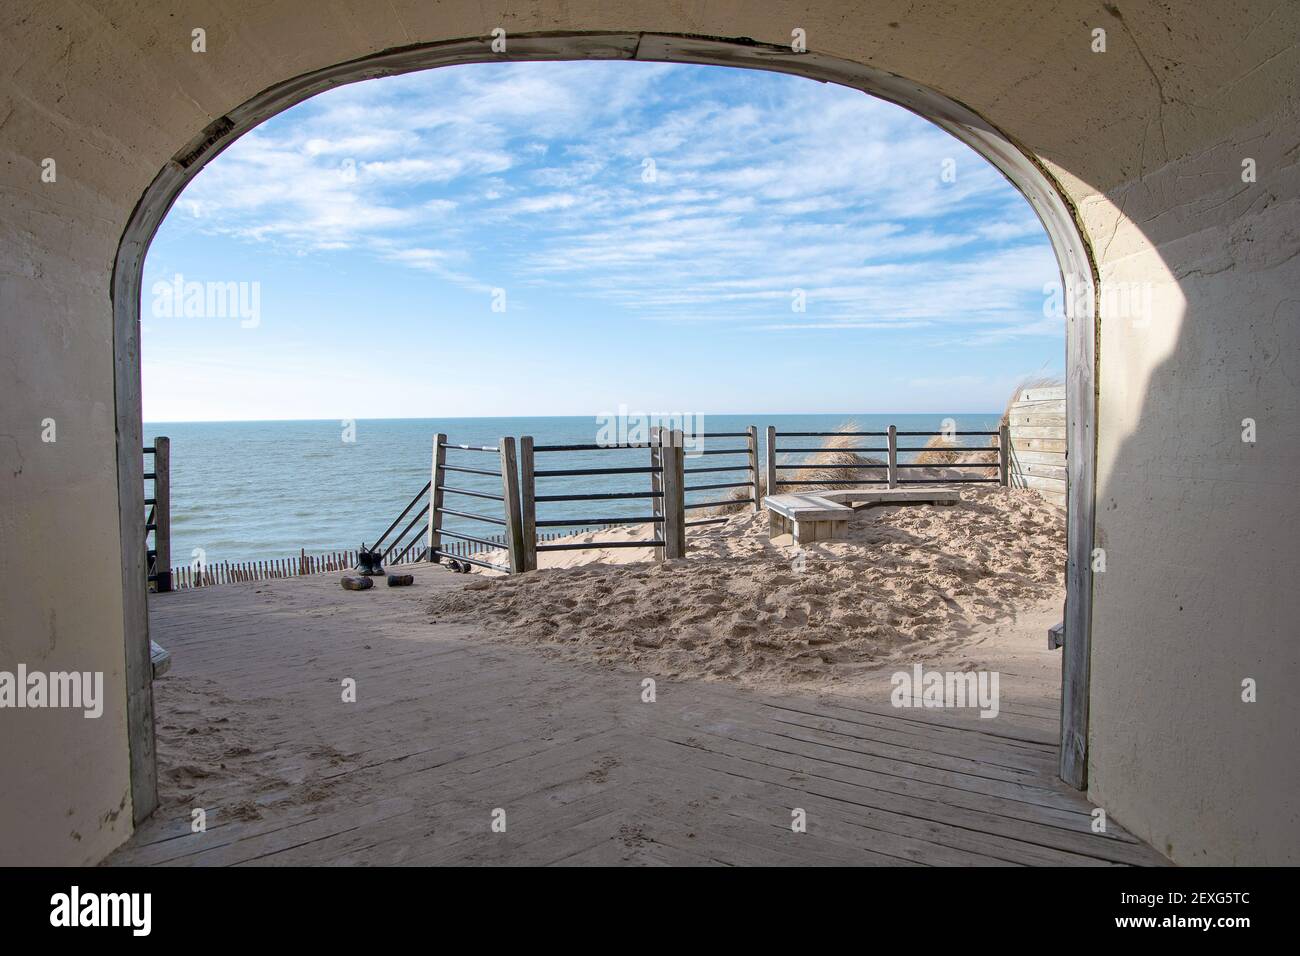 Concrete tunnel on sand dune with fence overlooking Lake Michigan Stock Photo